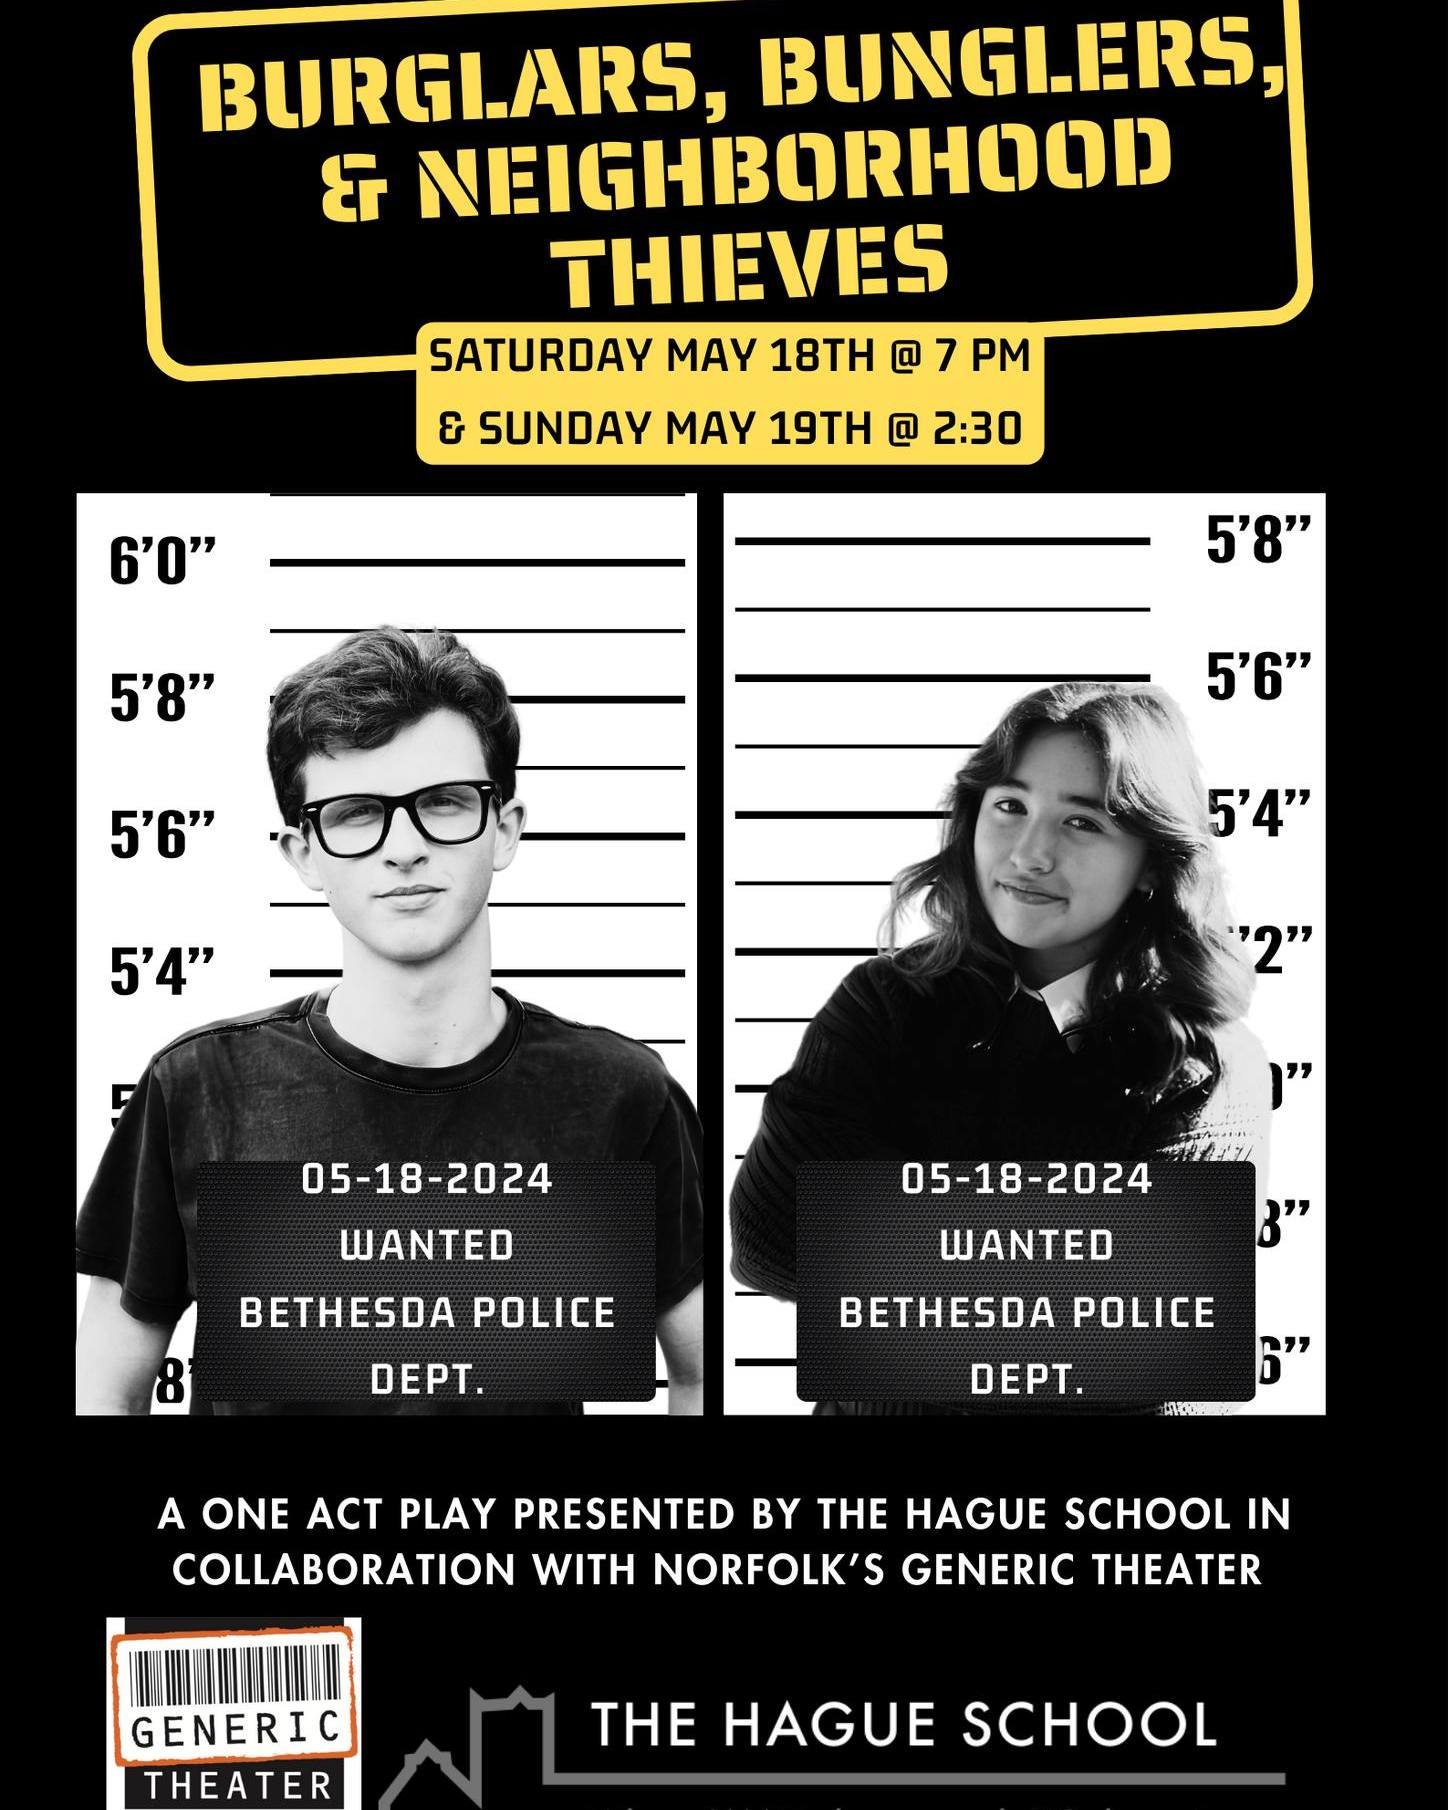 Invite your family and friends to come and see The Hague School's first theatrical collaboration with @generictheater Burglers, Bunglers, and Neighborhood Thieves is a hilarious comedy about lies, thievery, and mistaken identity. Attendance is free a